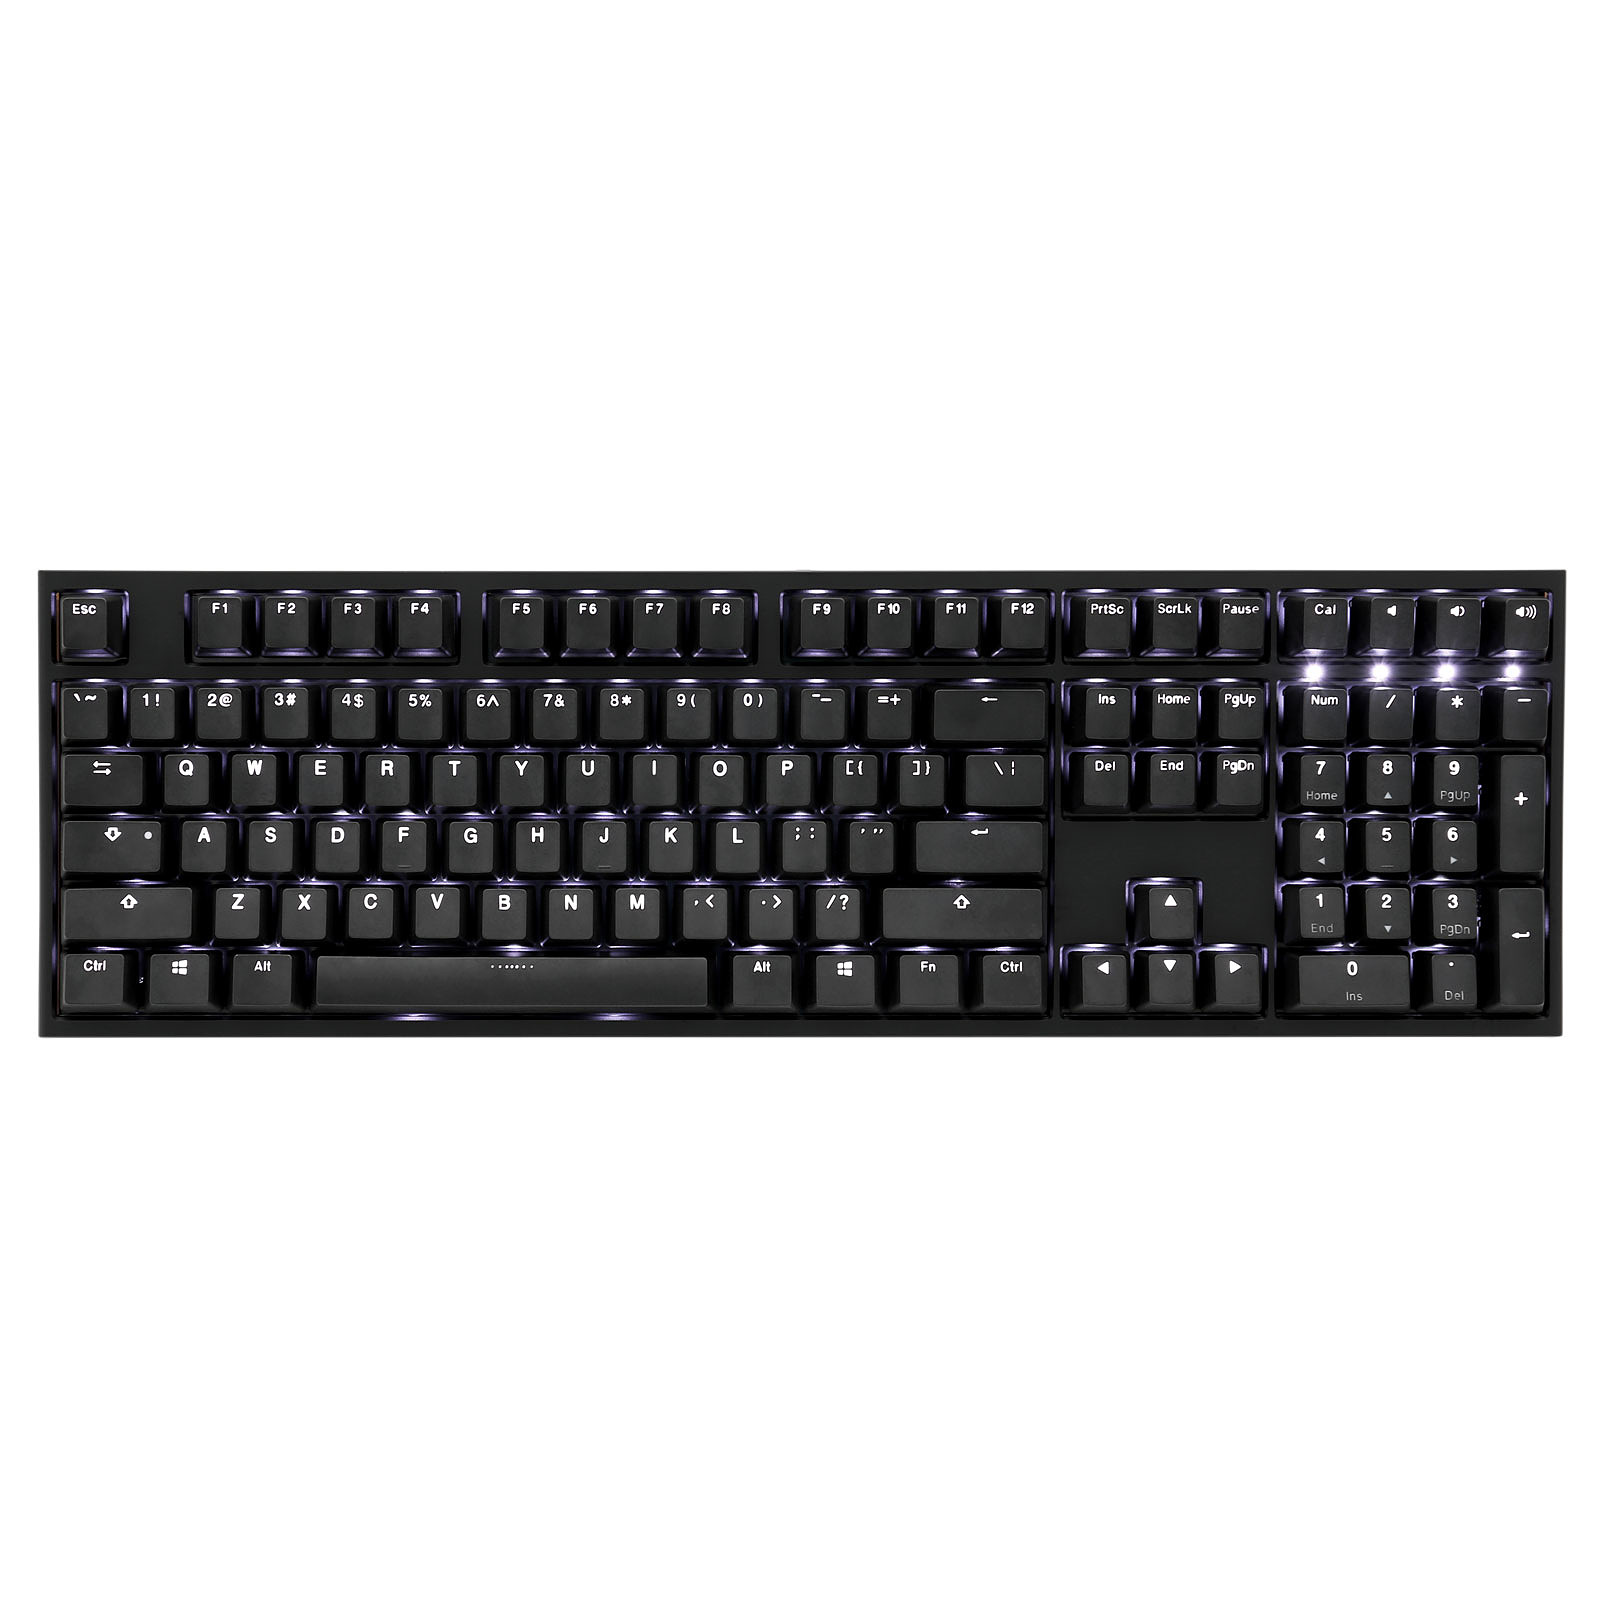 Ducky Channel One 2 Backlit (coloris noir - Cherry MX Red - LEDs blanches) - Clavier PC Ducky Channel